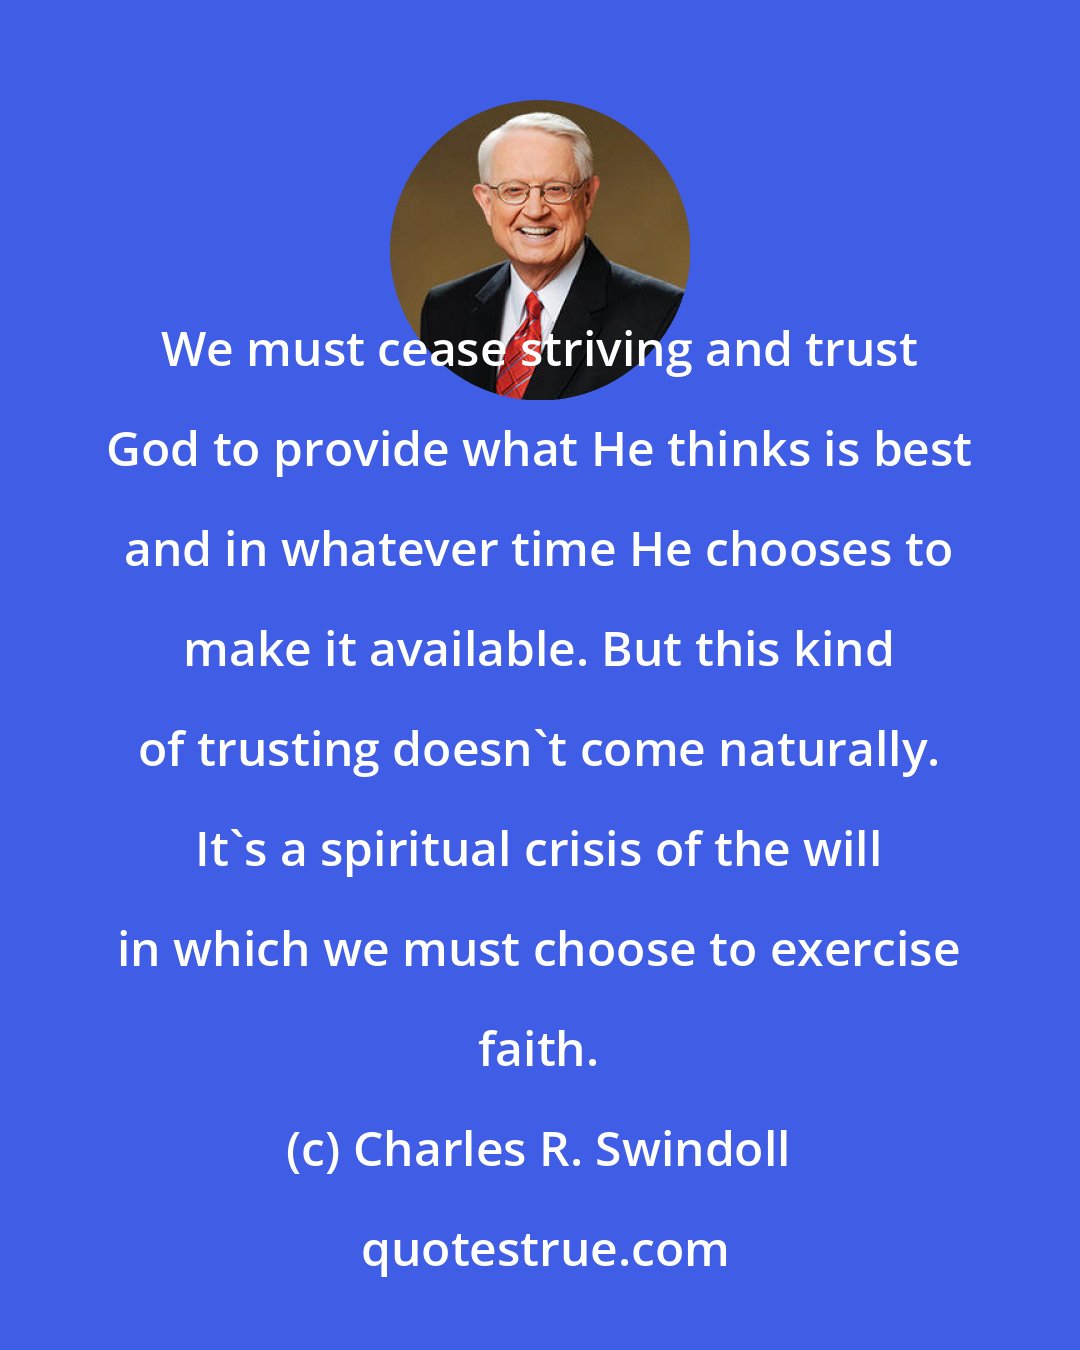 Charles R. Swindoll: We must cease striving and trust God to provide what He thinks is best and in whatever time He chooses to make it available. But this kind of trusting doesn't come naturally. It's a spiritual crisis of the will in which we must choose to exercise faith.